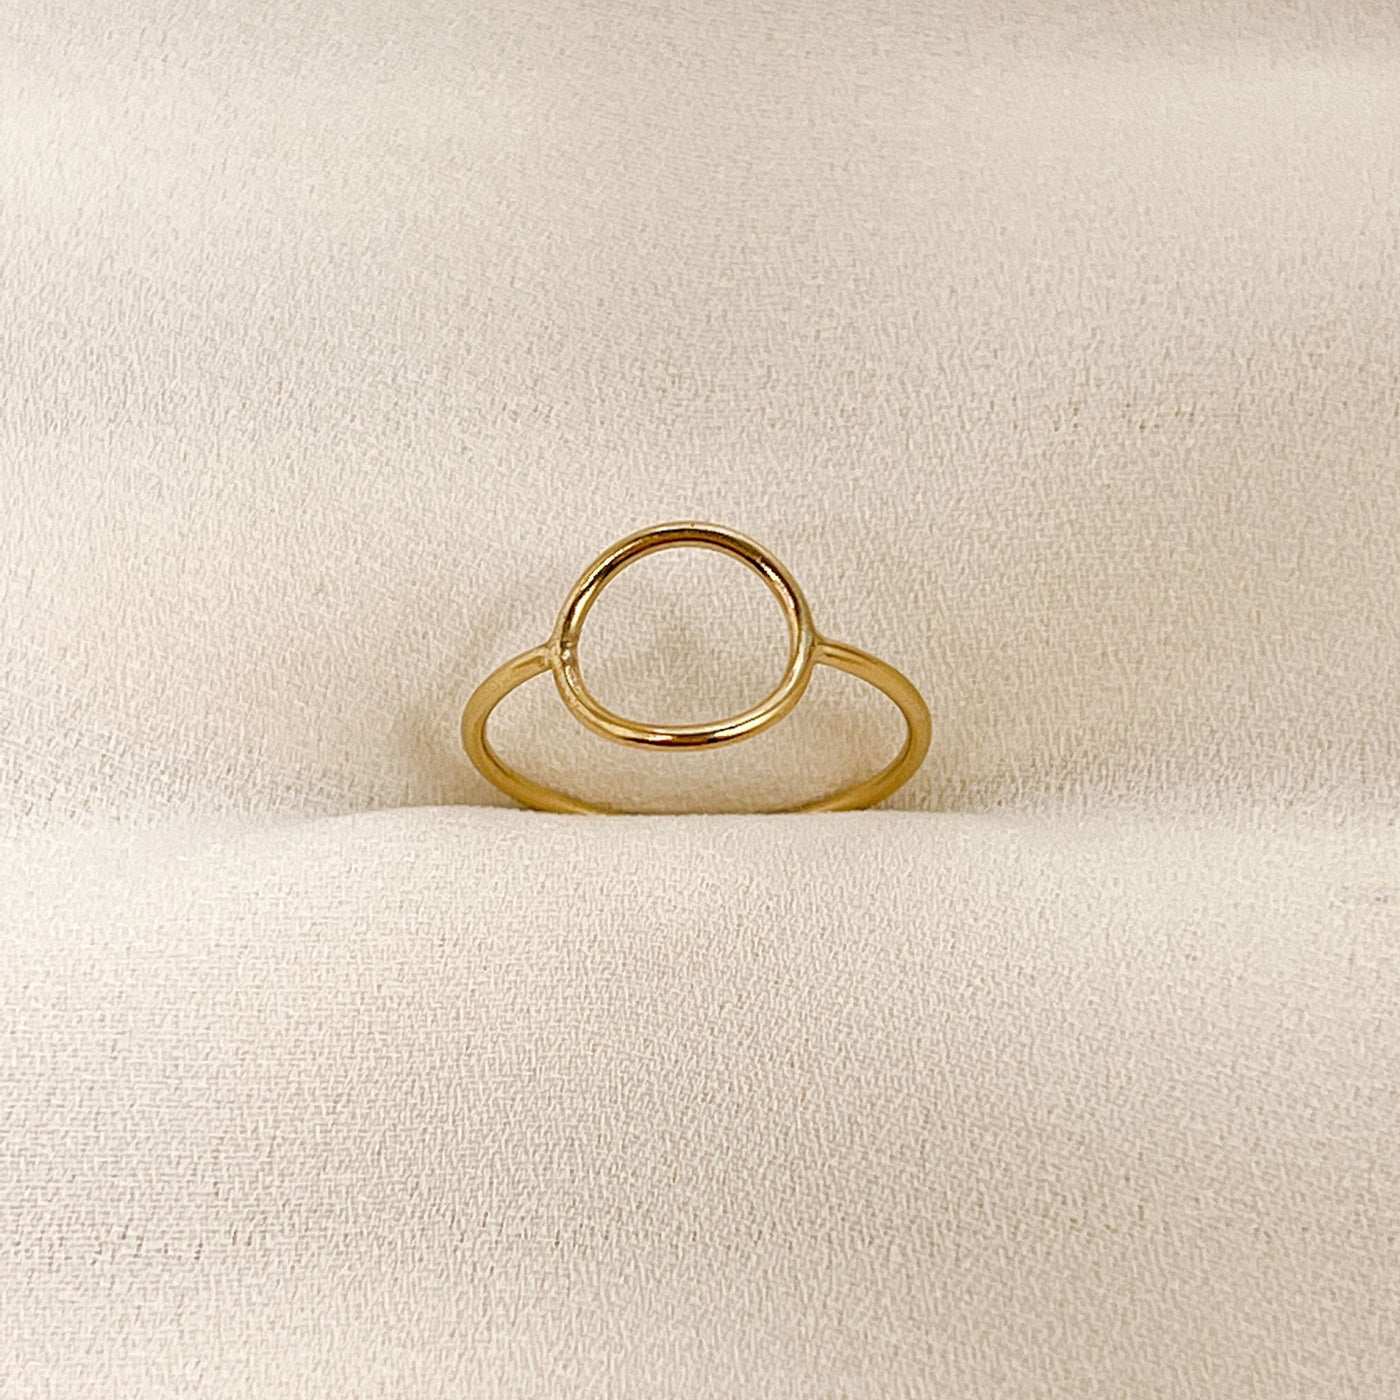 highly polished, dainty 14KGF hollow circle stacking ring displayed on cream coloured fabric